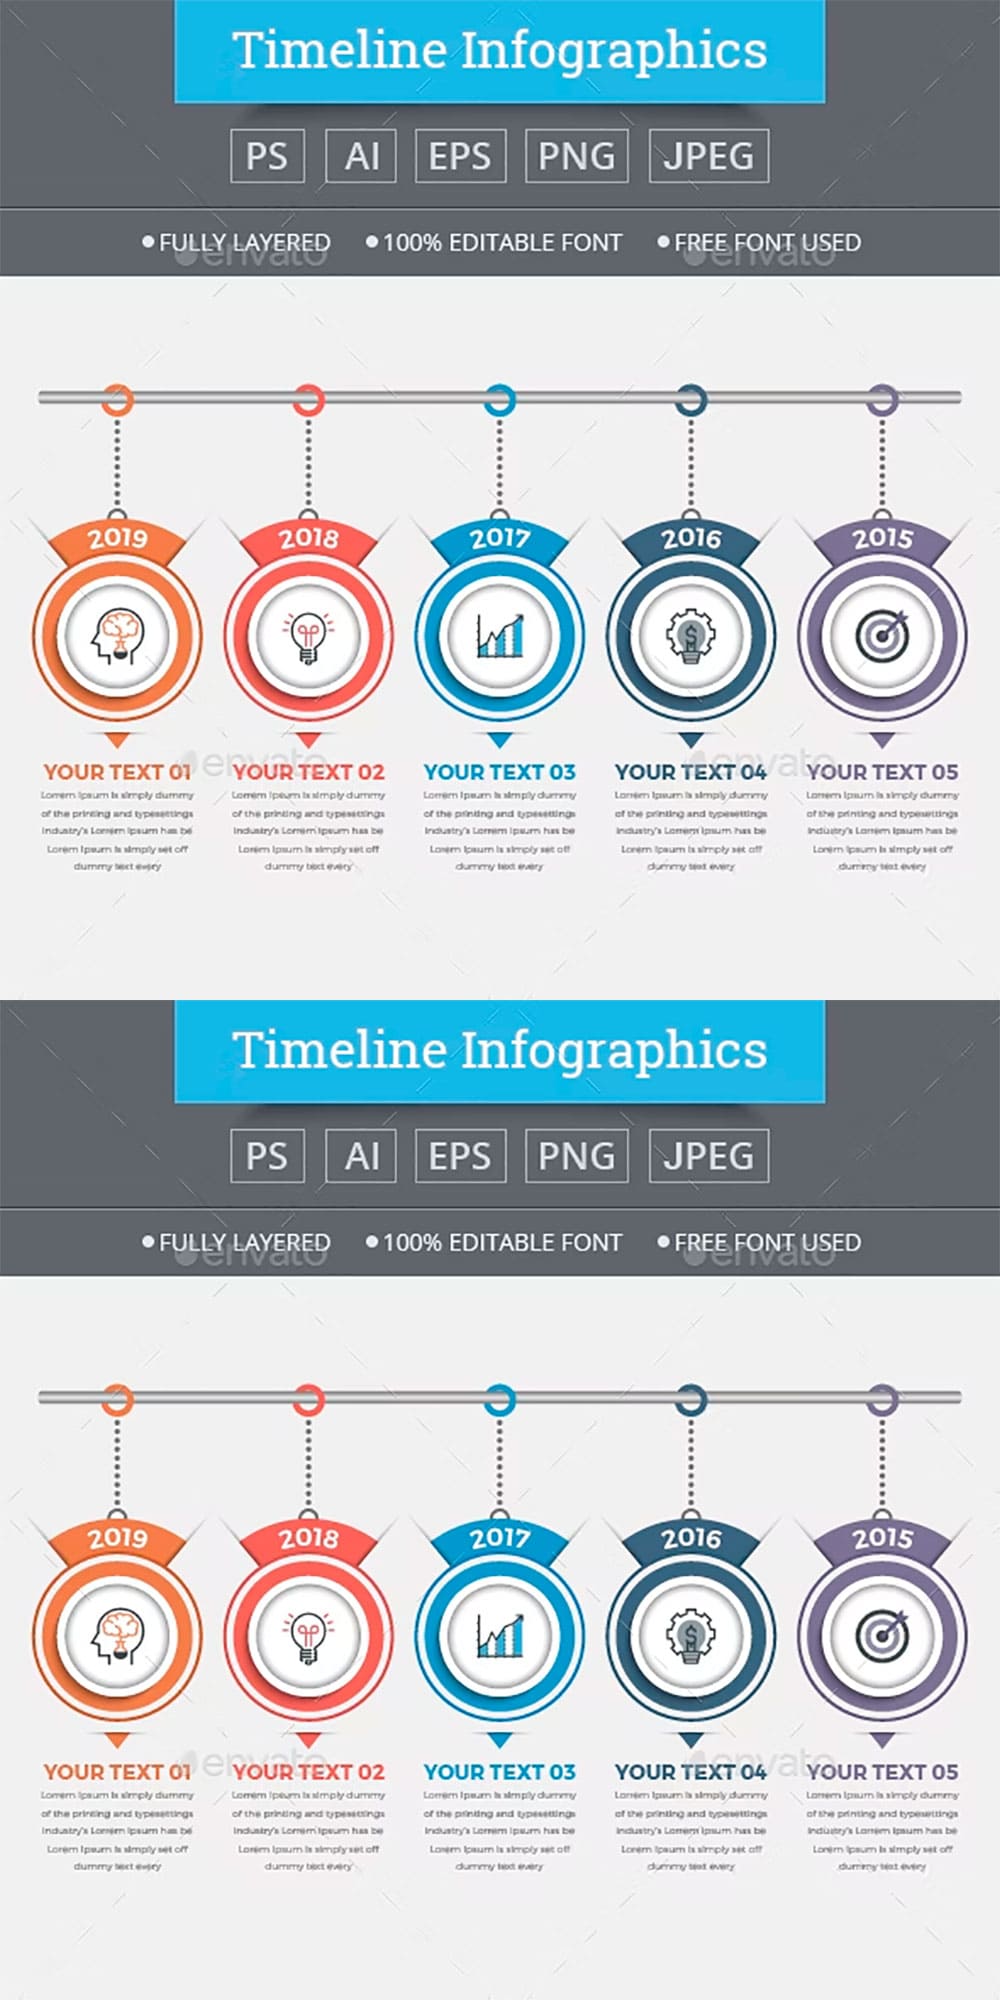 Timeline infographics 805, picture for pinterest.